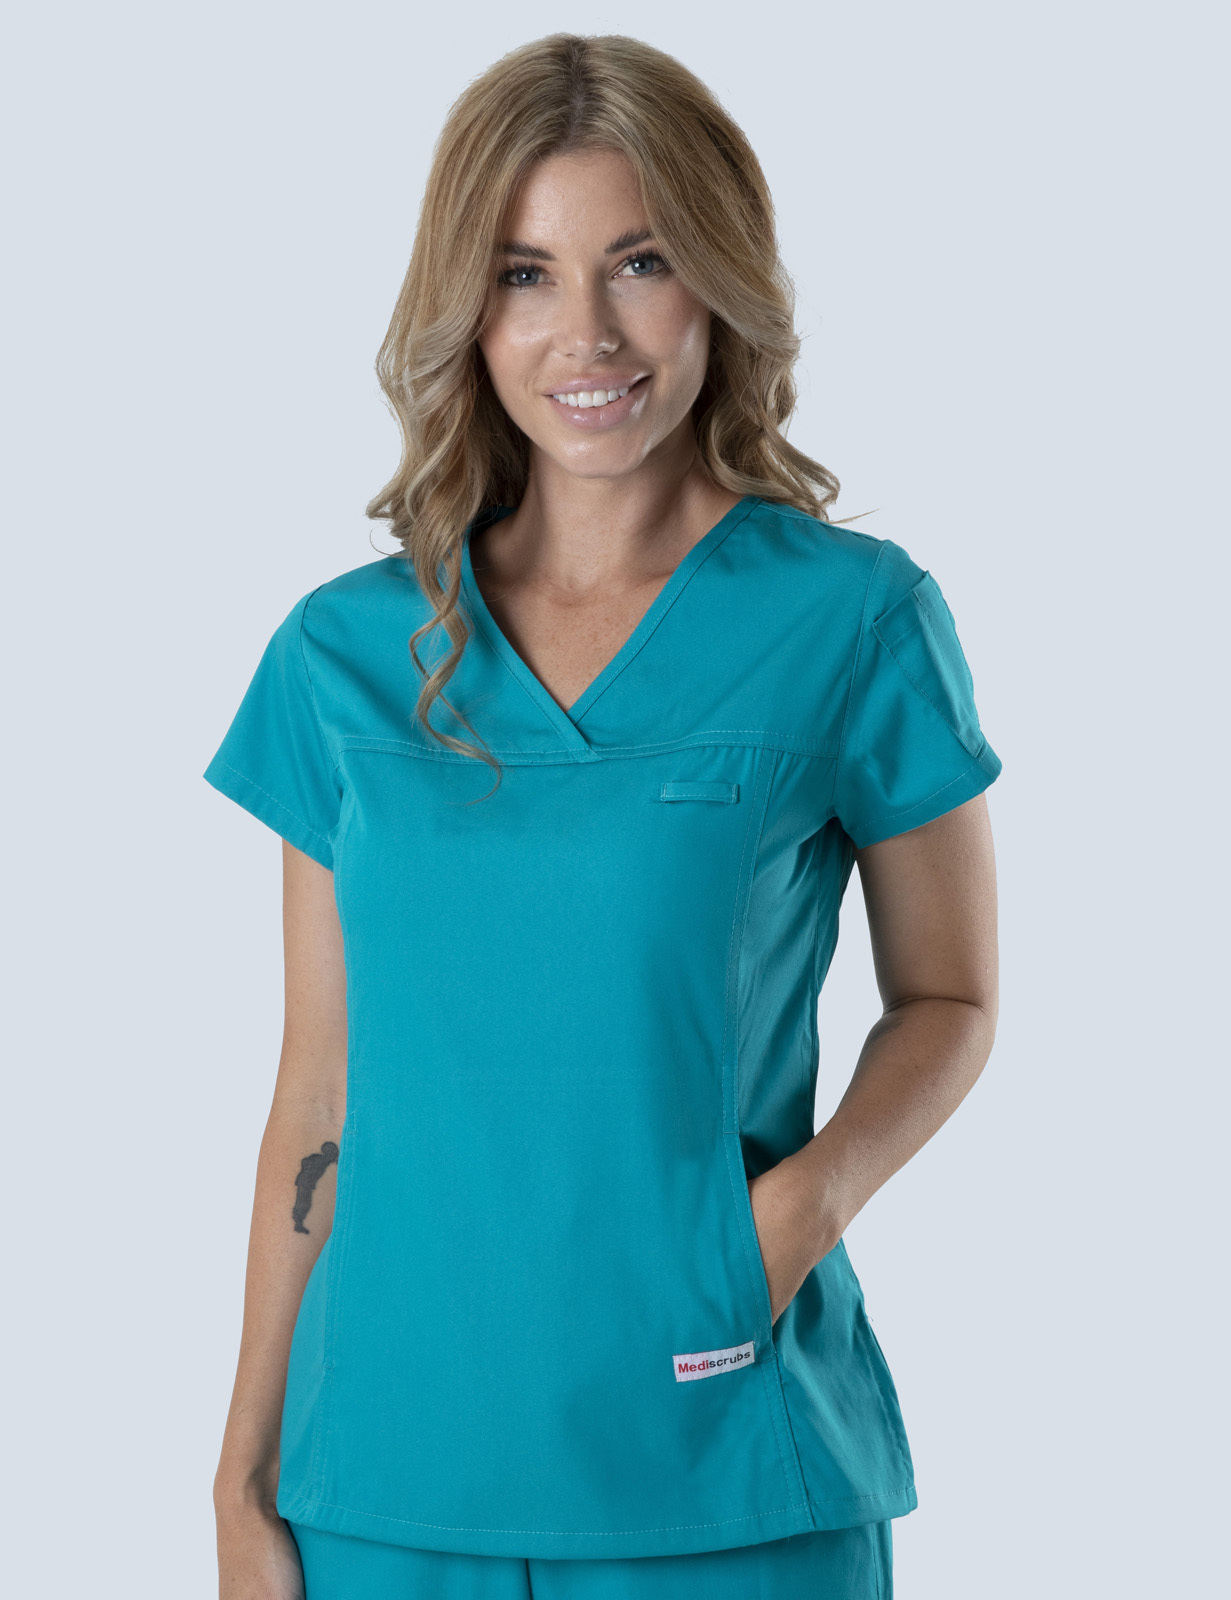 Gold coast University Hospital - Cardiology (Women's Fit Solid Scrub Top and Cargo Pants in Teal incl Logos)